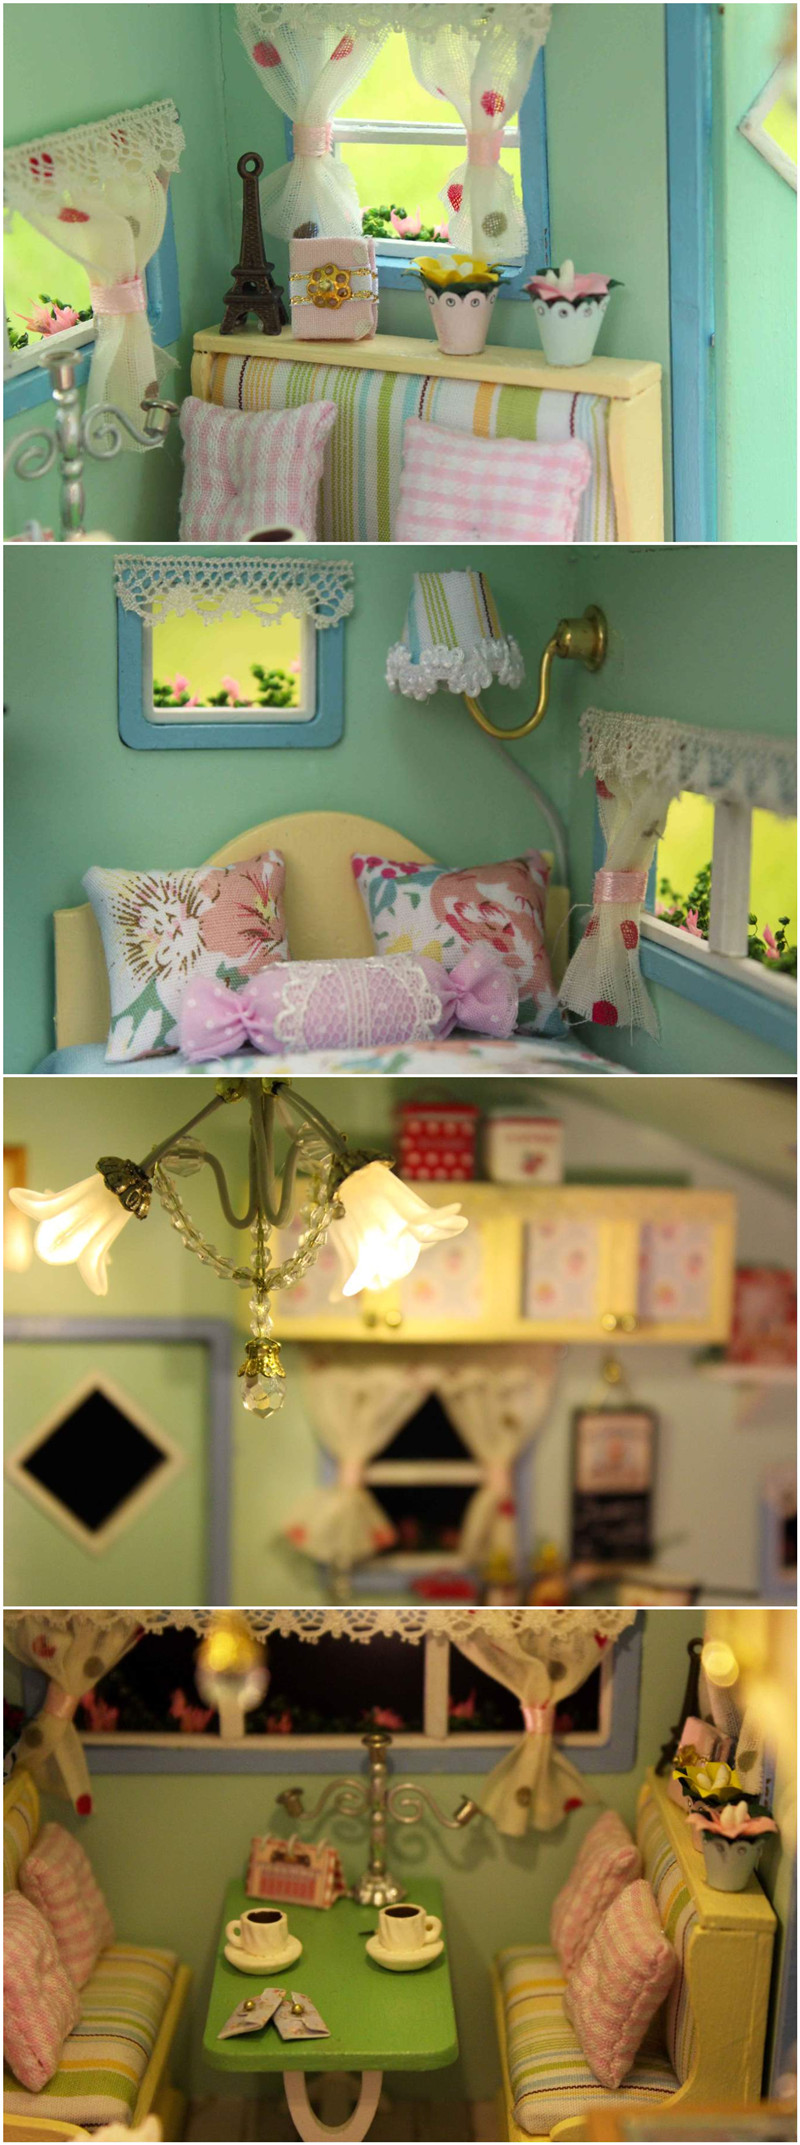 CuteRoom-A-016-Time-Travel-DIY-Wooden-Dollhouse-Miniature-Kit-Doll-house-LED-Music-Voice-Control-1032415-4